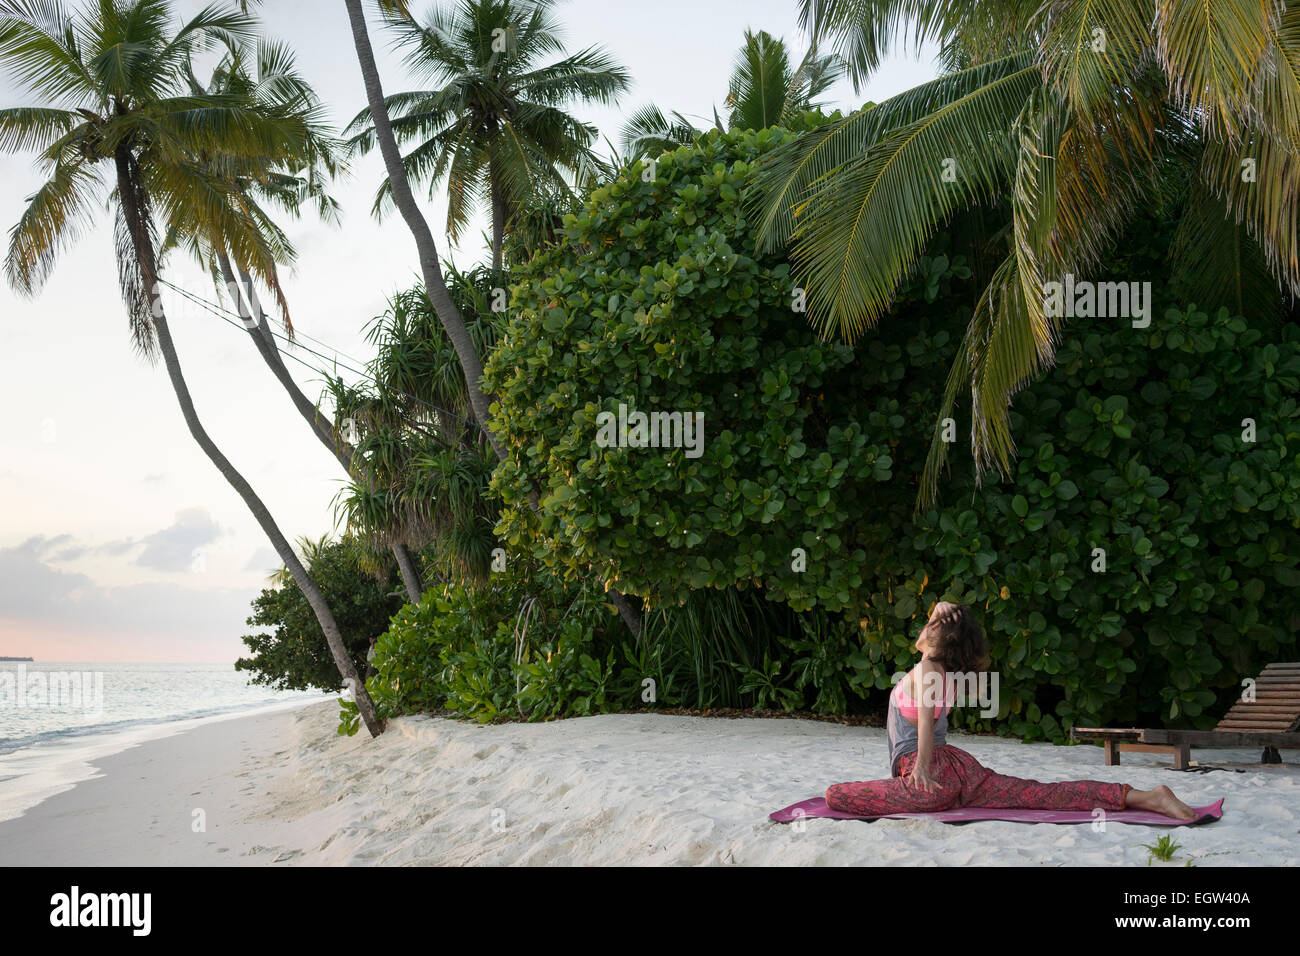 Woman doing yoga on beach in the Maldives. Stock Photo